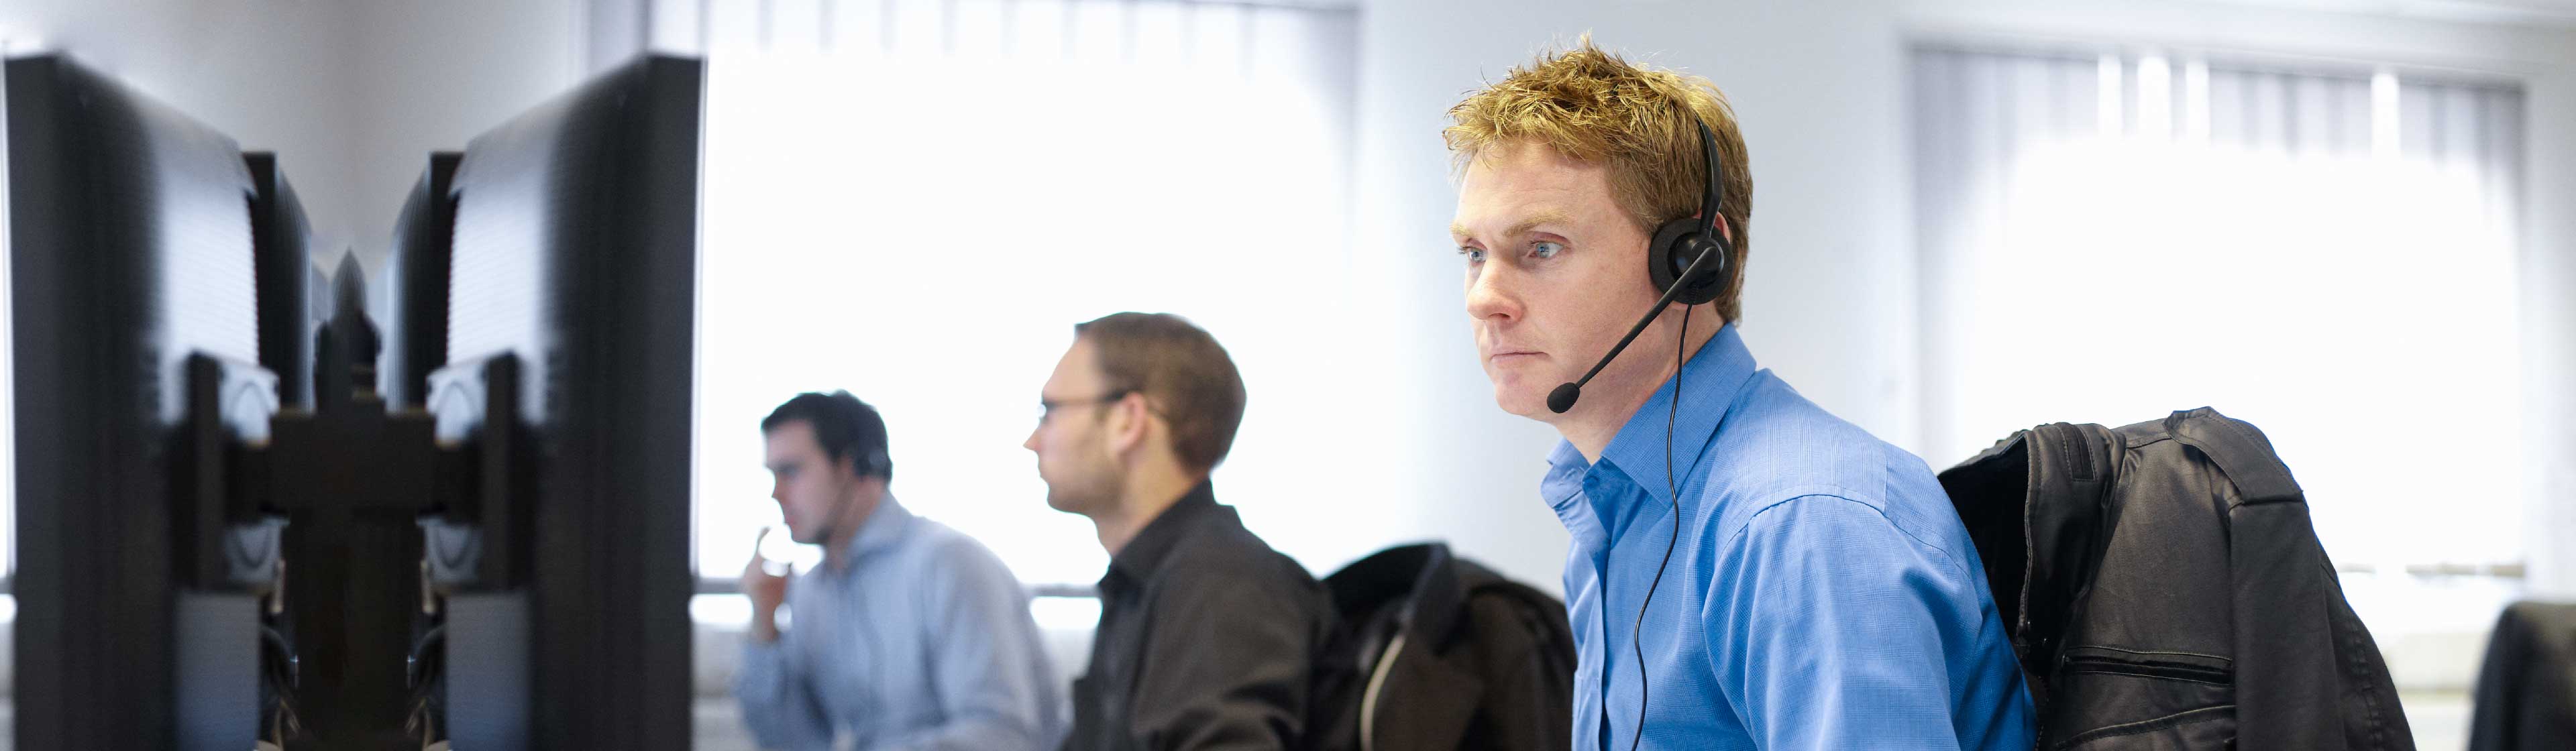 A man in an office on an IT support call